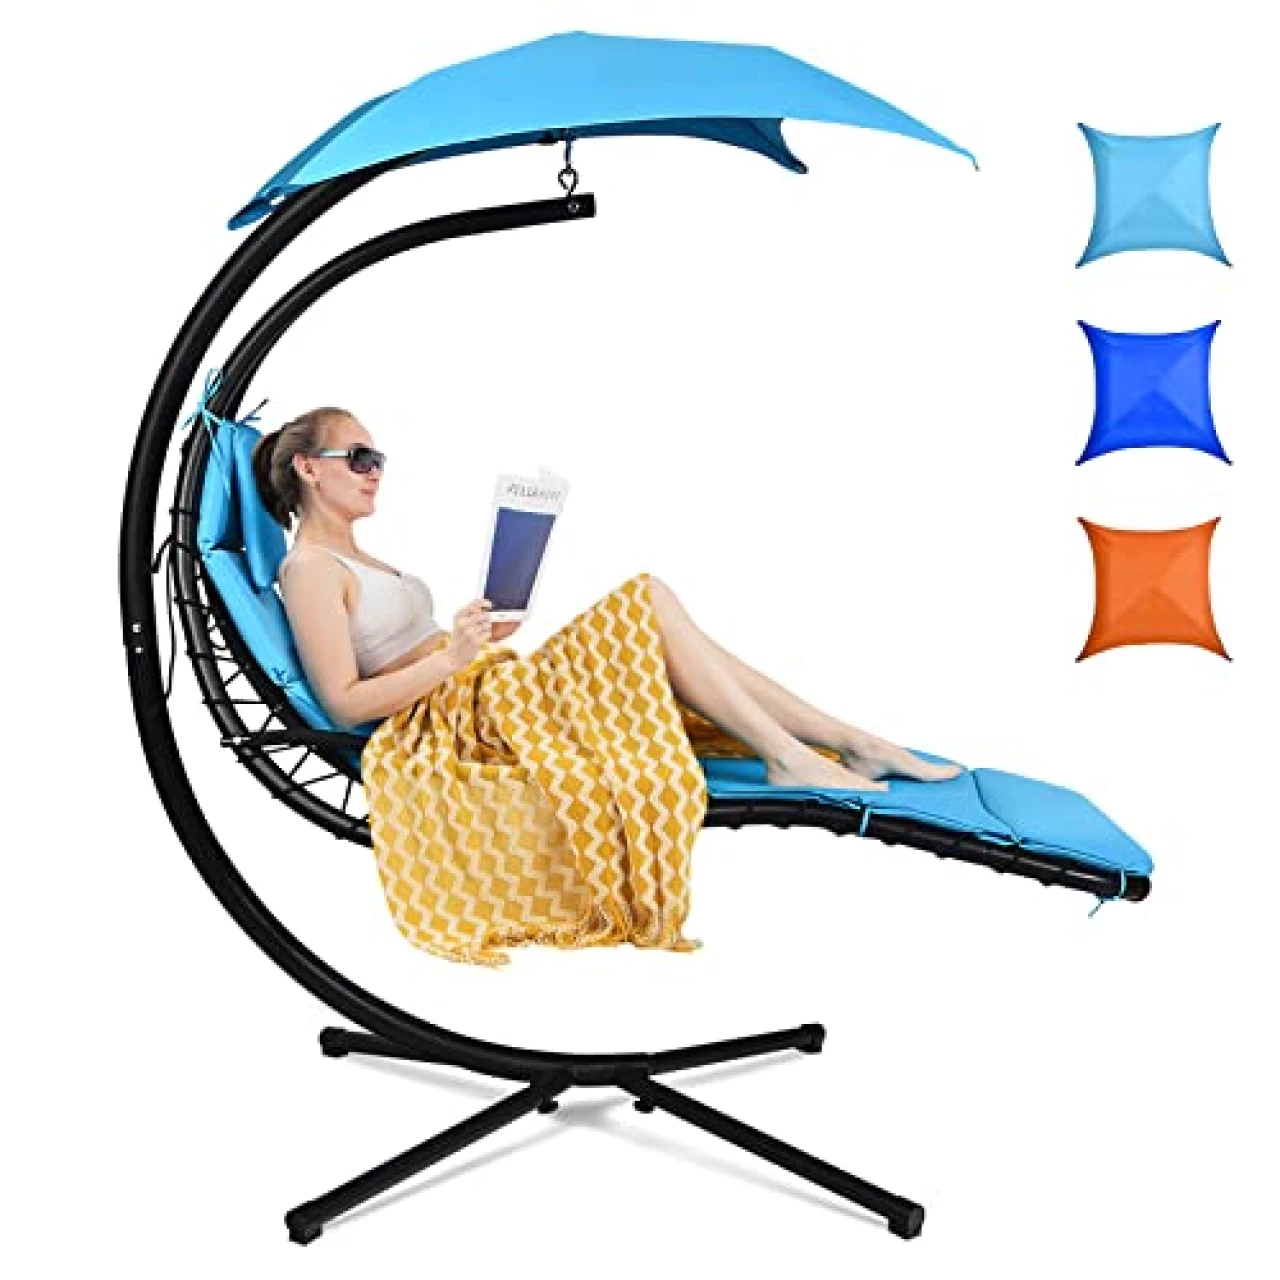 Tangkula Hanging Chaise Lounge, Arc Stand Floating Hammock Swing Chair w/Canopy and Built-in Pillow, Curved Steel Patio Lounge Chair, Freestanding Hammock Chair with Stand for Patio Backyard Garden